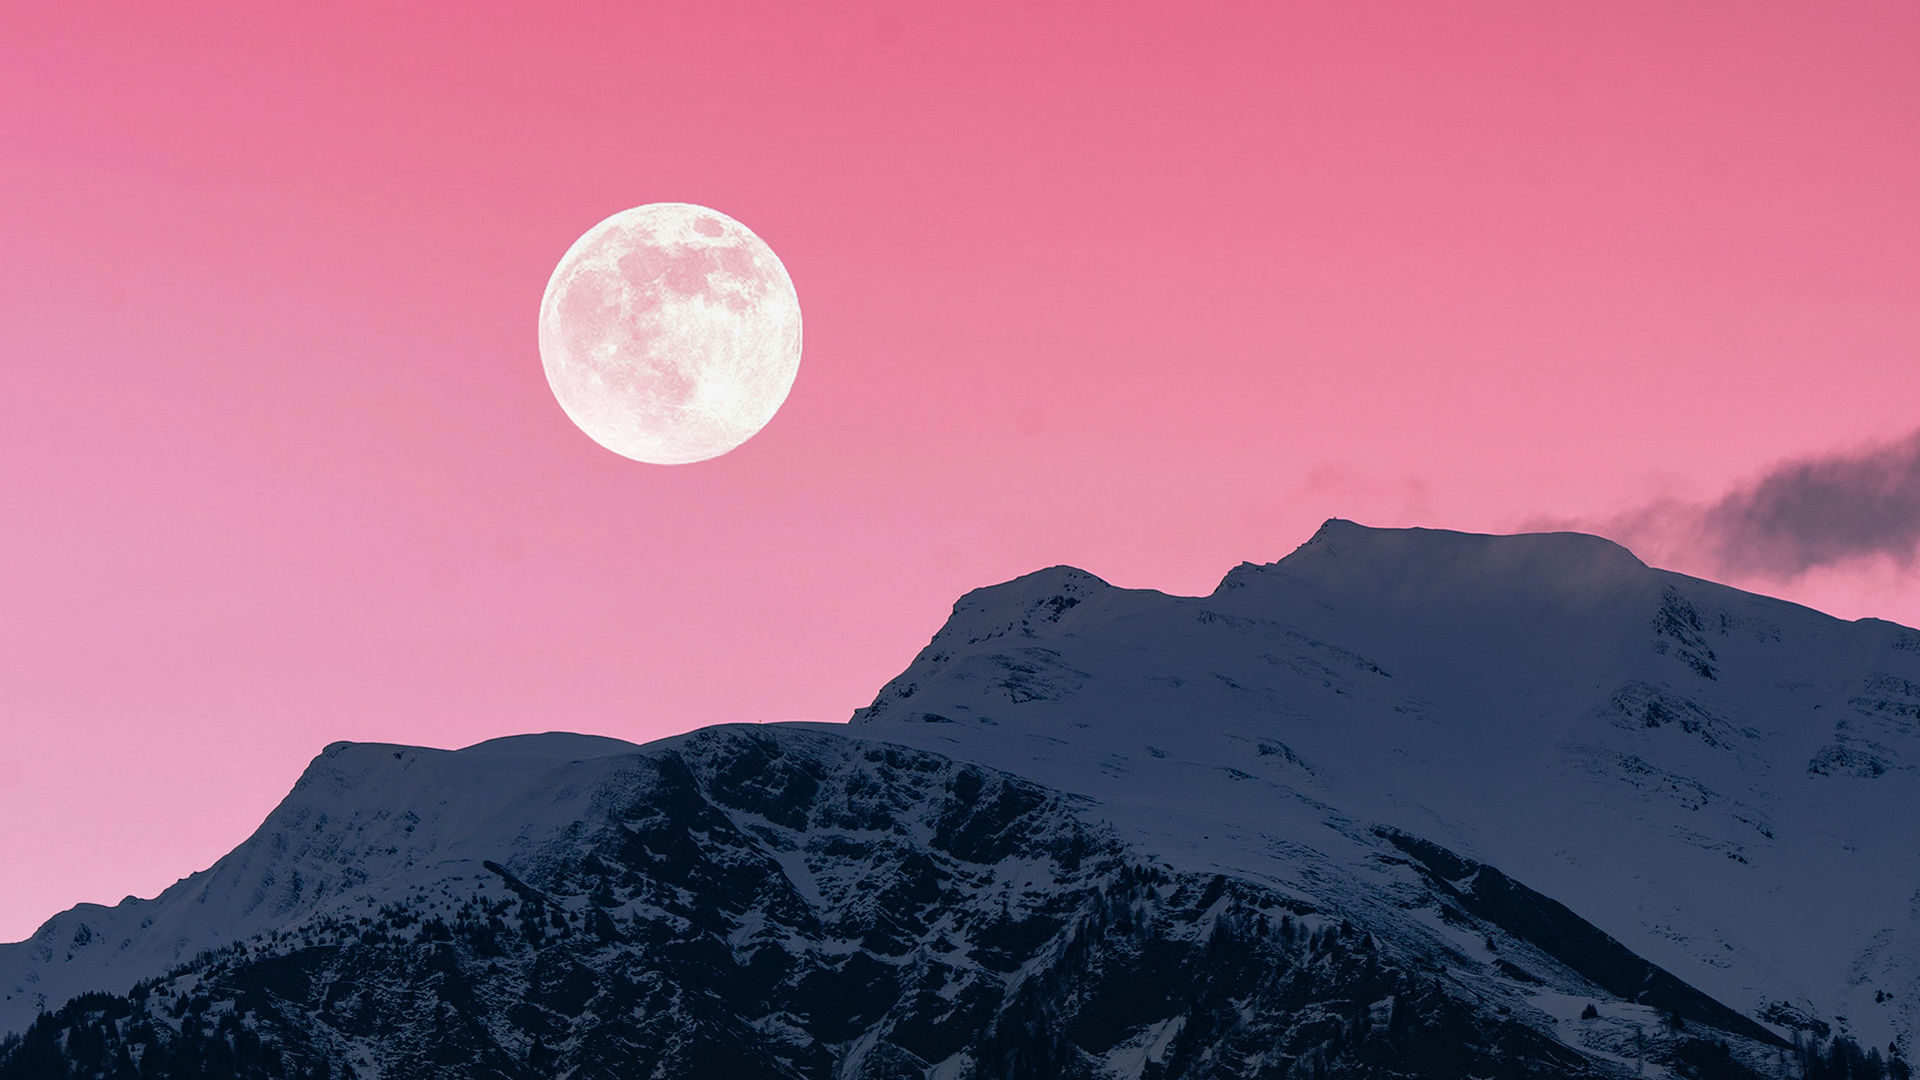 The Full Pink Moon: Enjoy The First Supermoon of 2021!